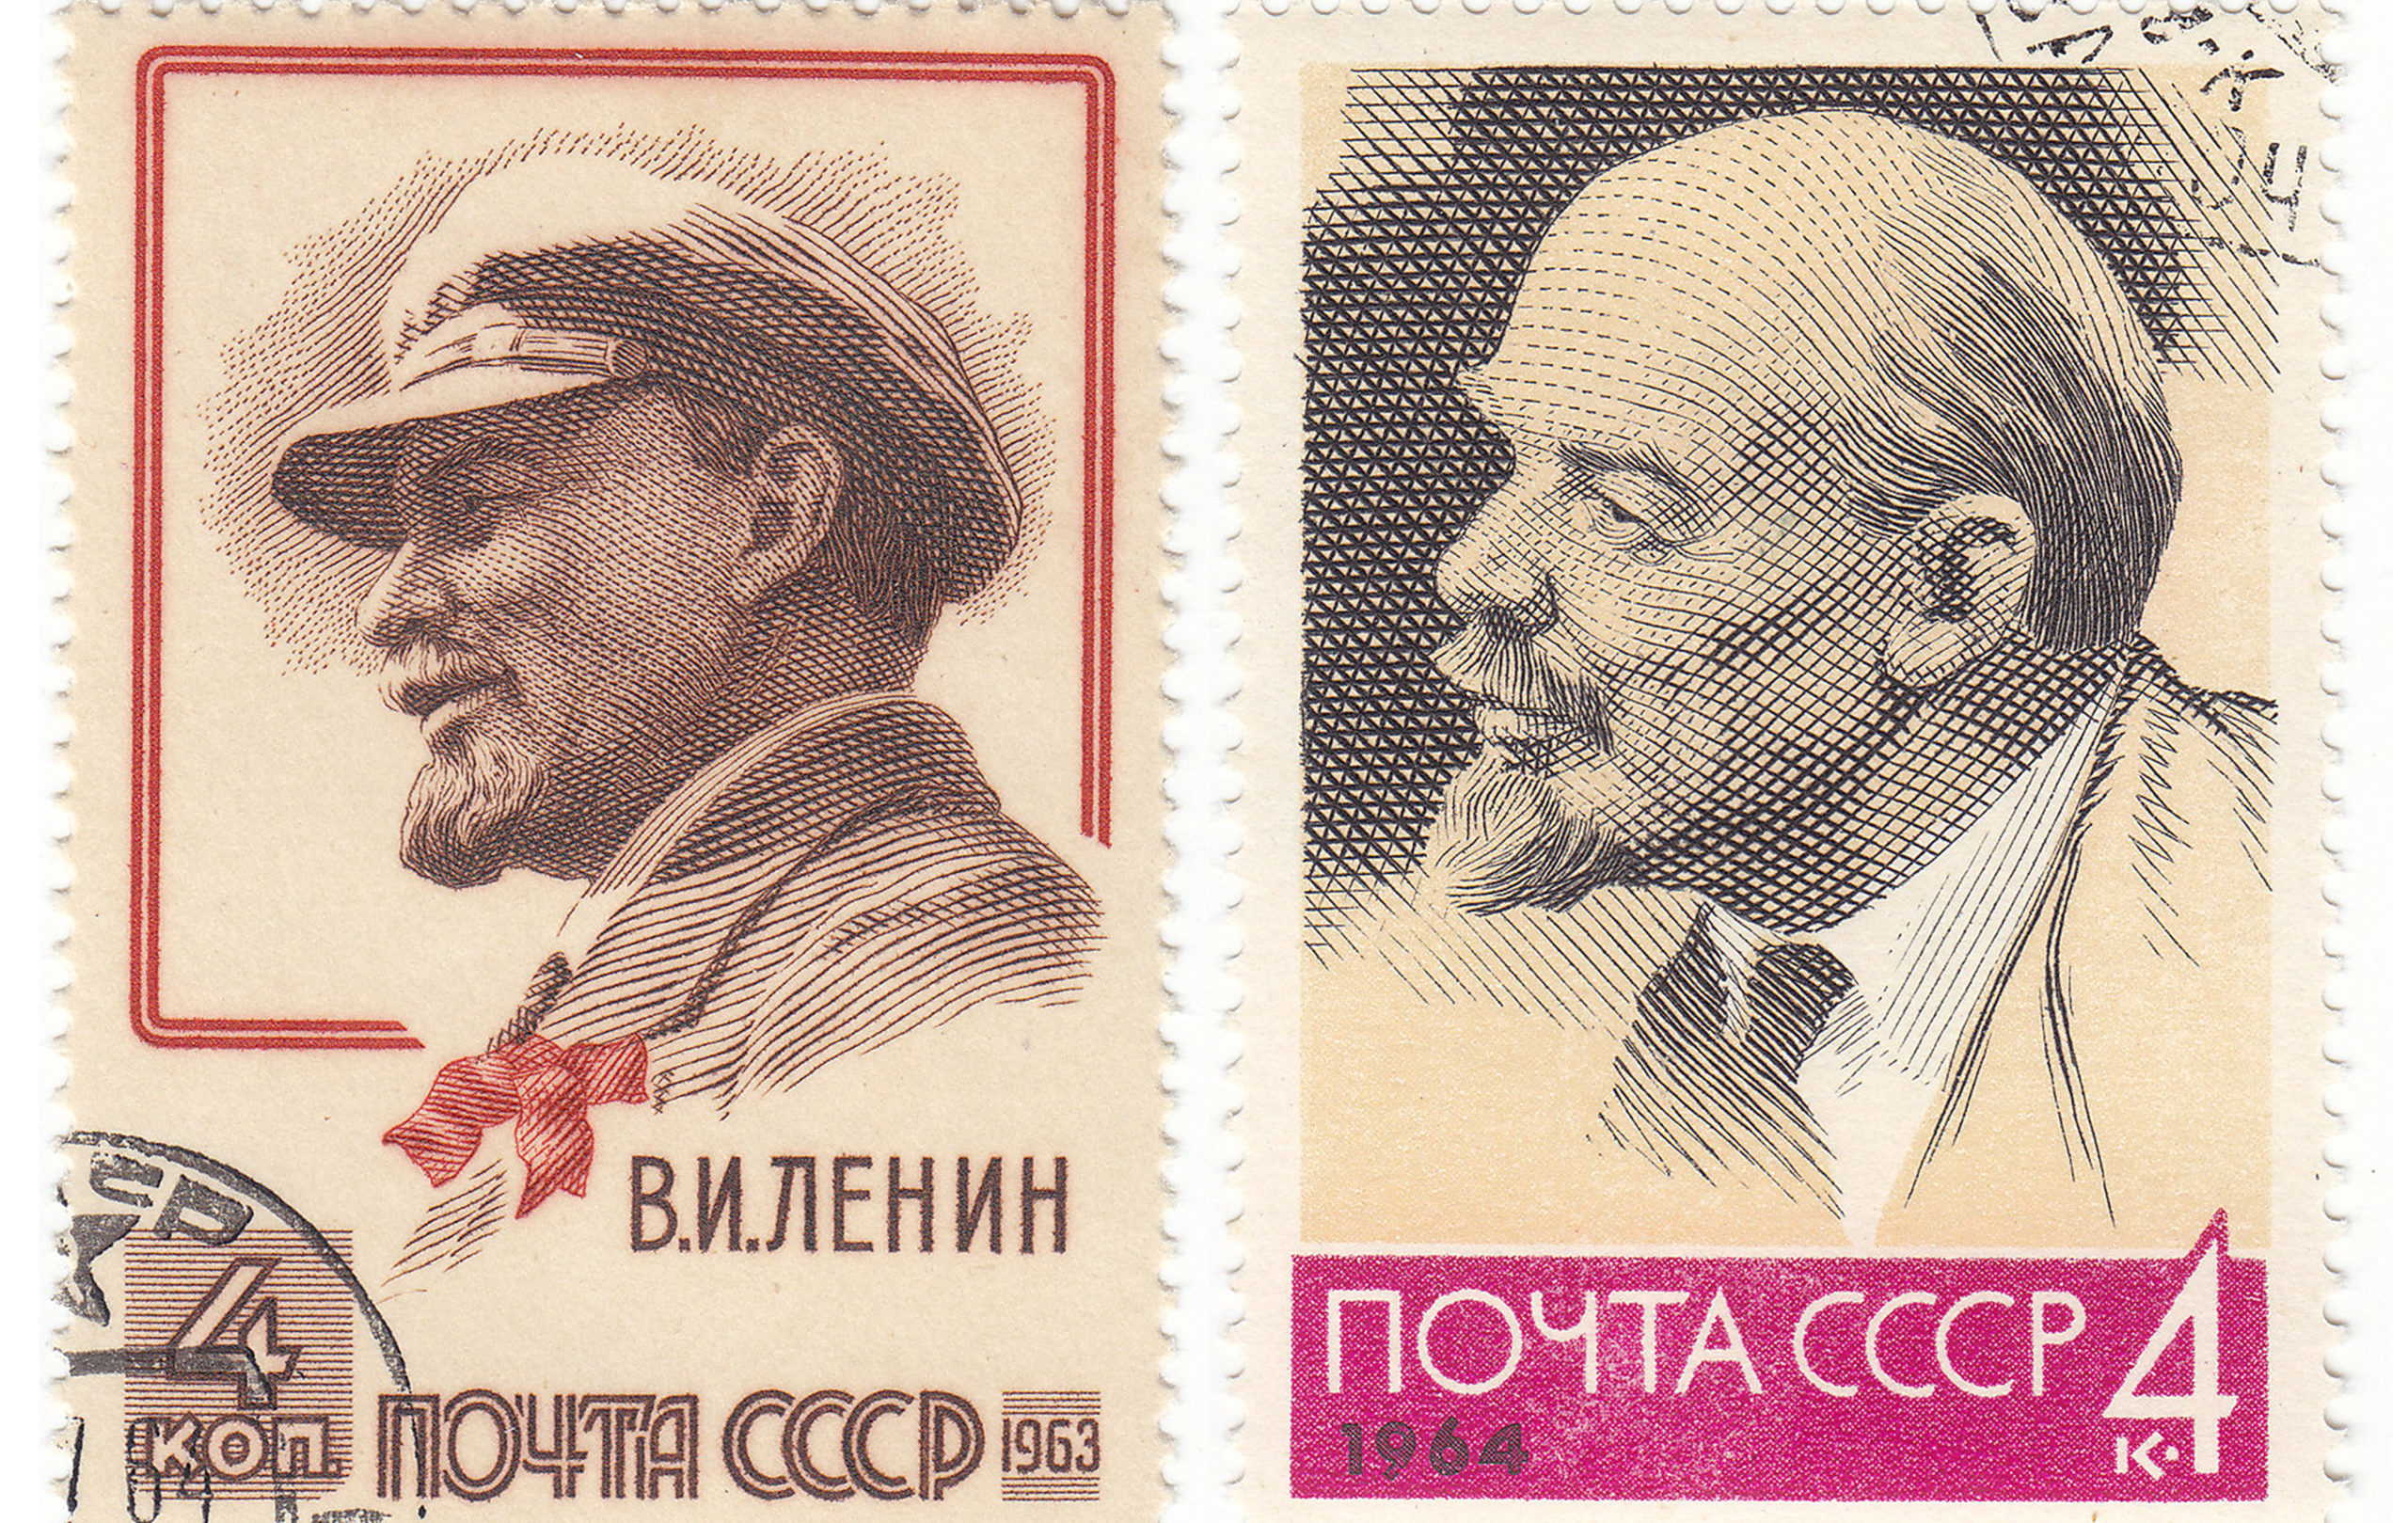 Ussr,-circa,1963,1964:,Two,Stamp,Printed,In,The,Ussr,Show